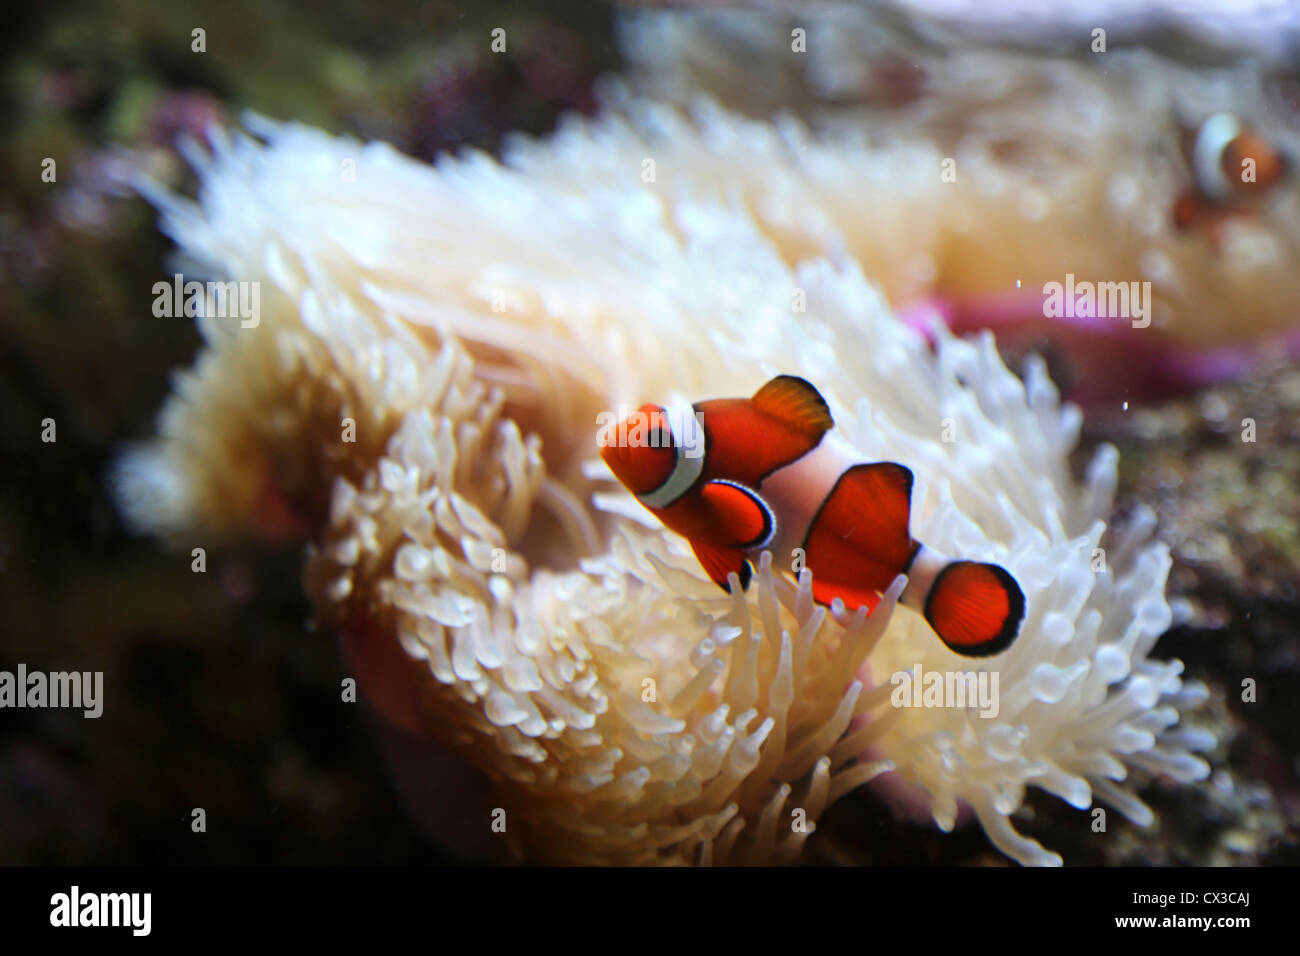 A Saltwater Aquarium Clownfish With Magnifica Anemone Stock Photo